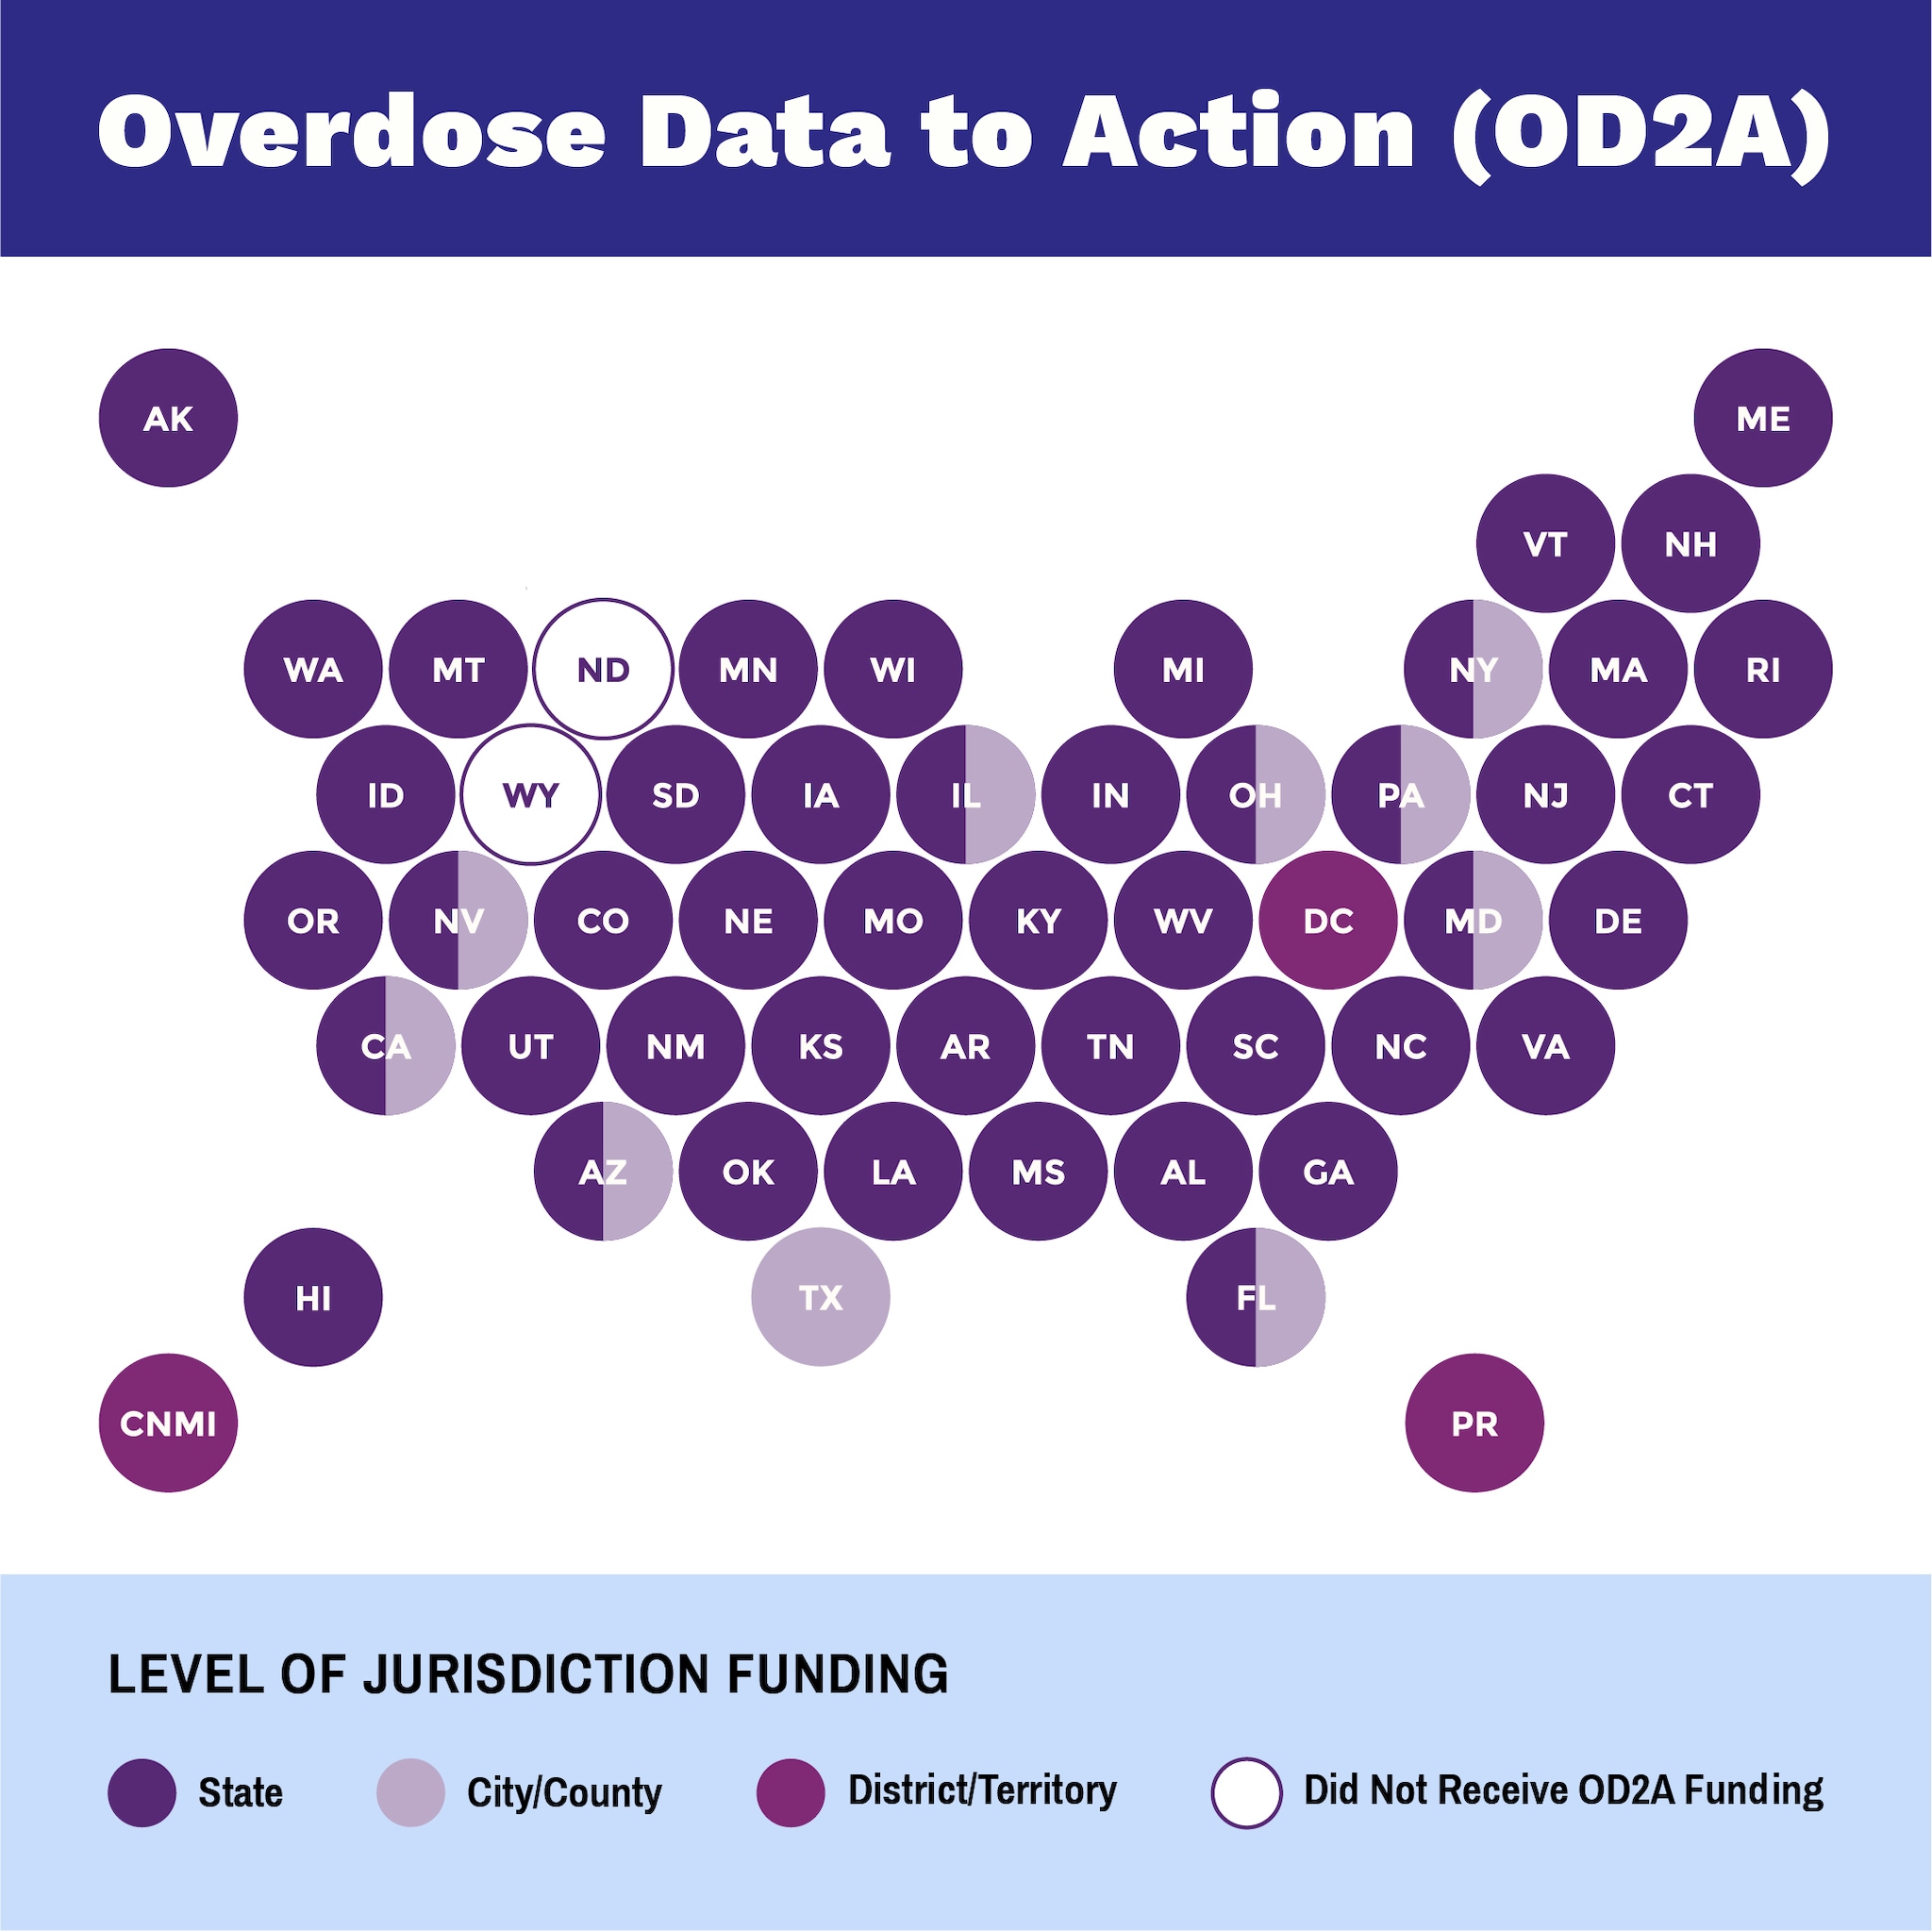 Overdose Data to Action map of US jurisdictions